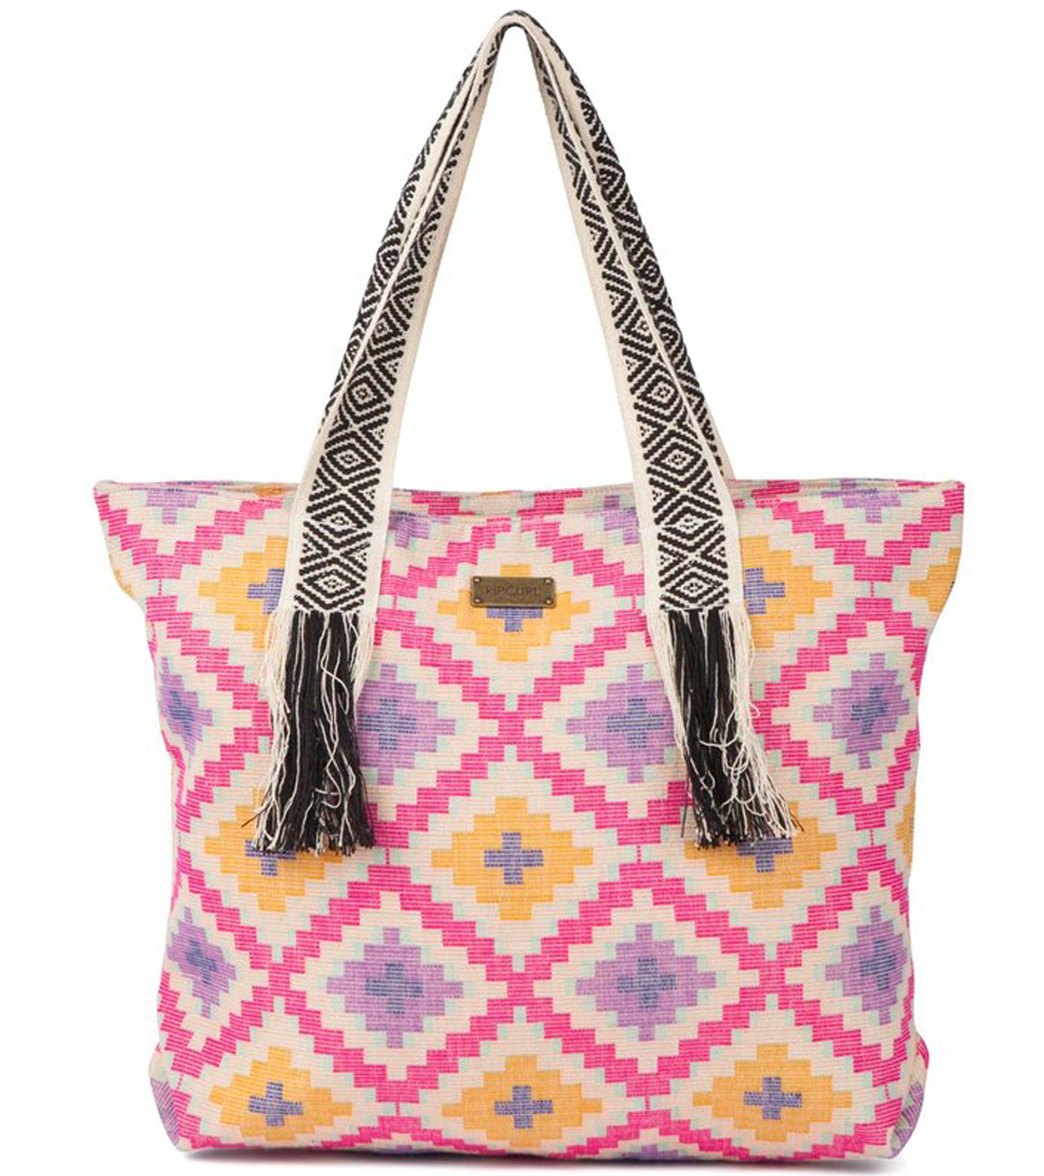 Rip Curl Women's Wind Song Beach Bag at SwimOutlet.com - Free Shipping